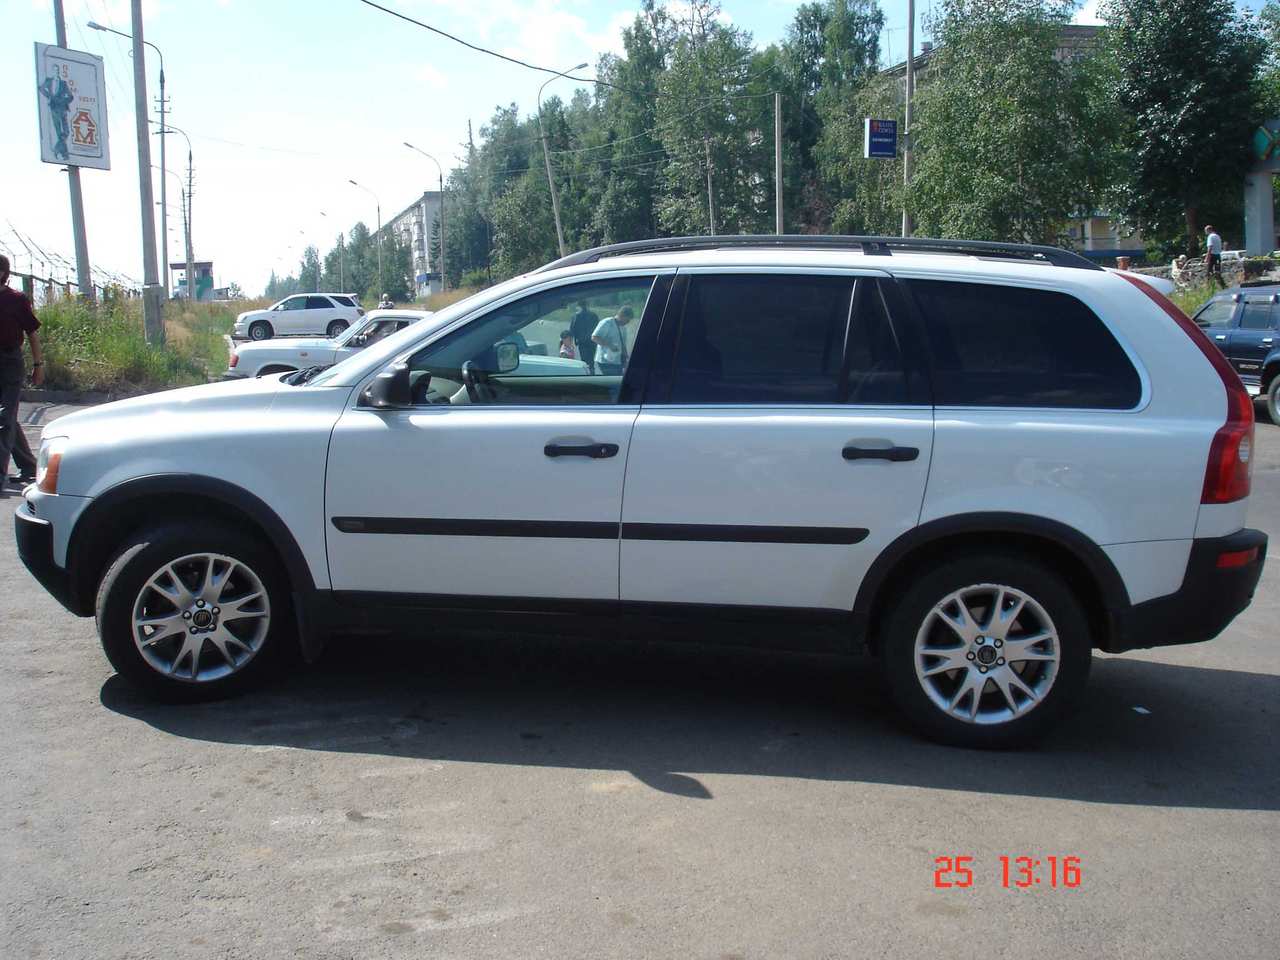 Volvo Xc90 Repairs And Service Pictures to pin on Pinterest